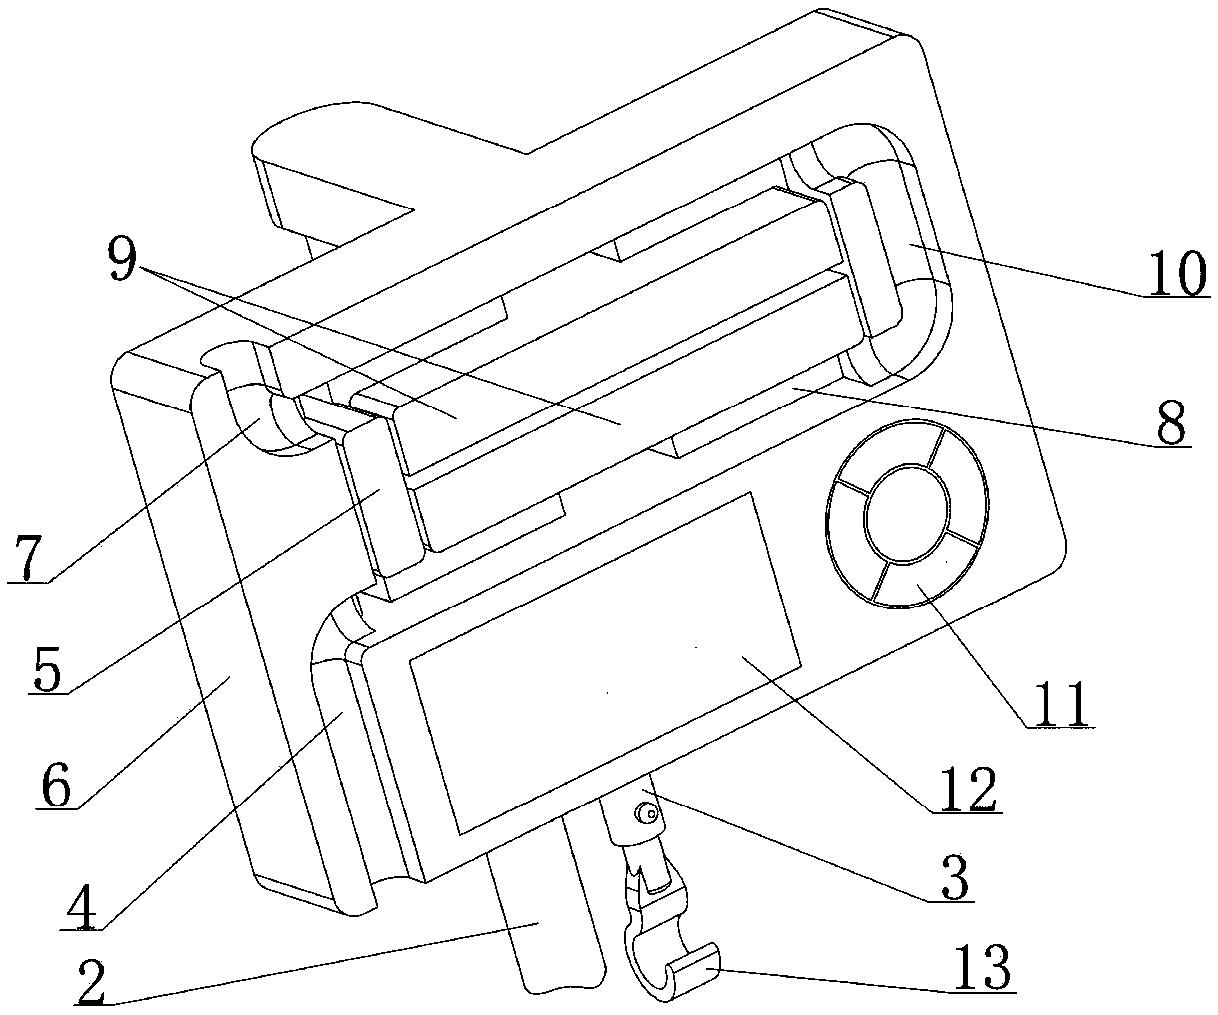 Medical multifunctional drainage control device